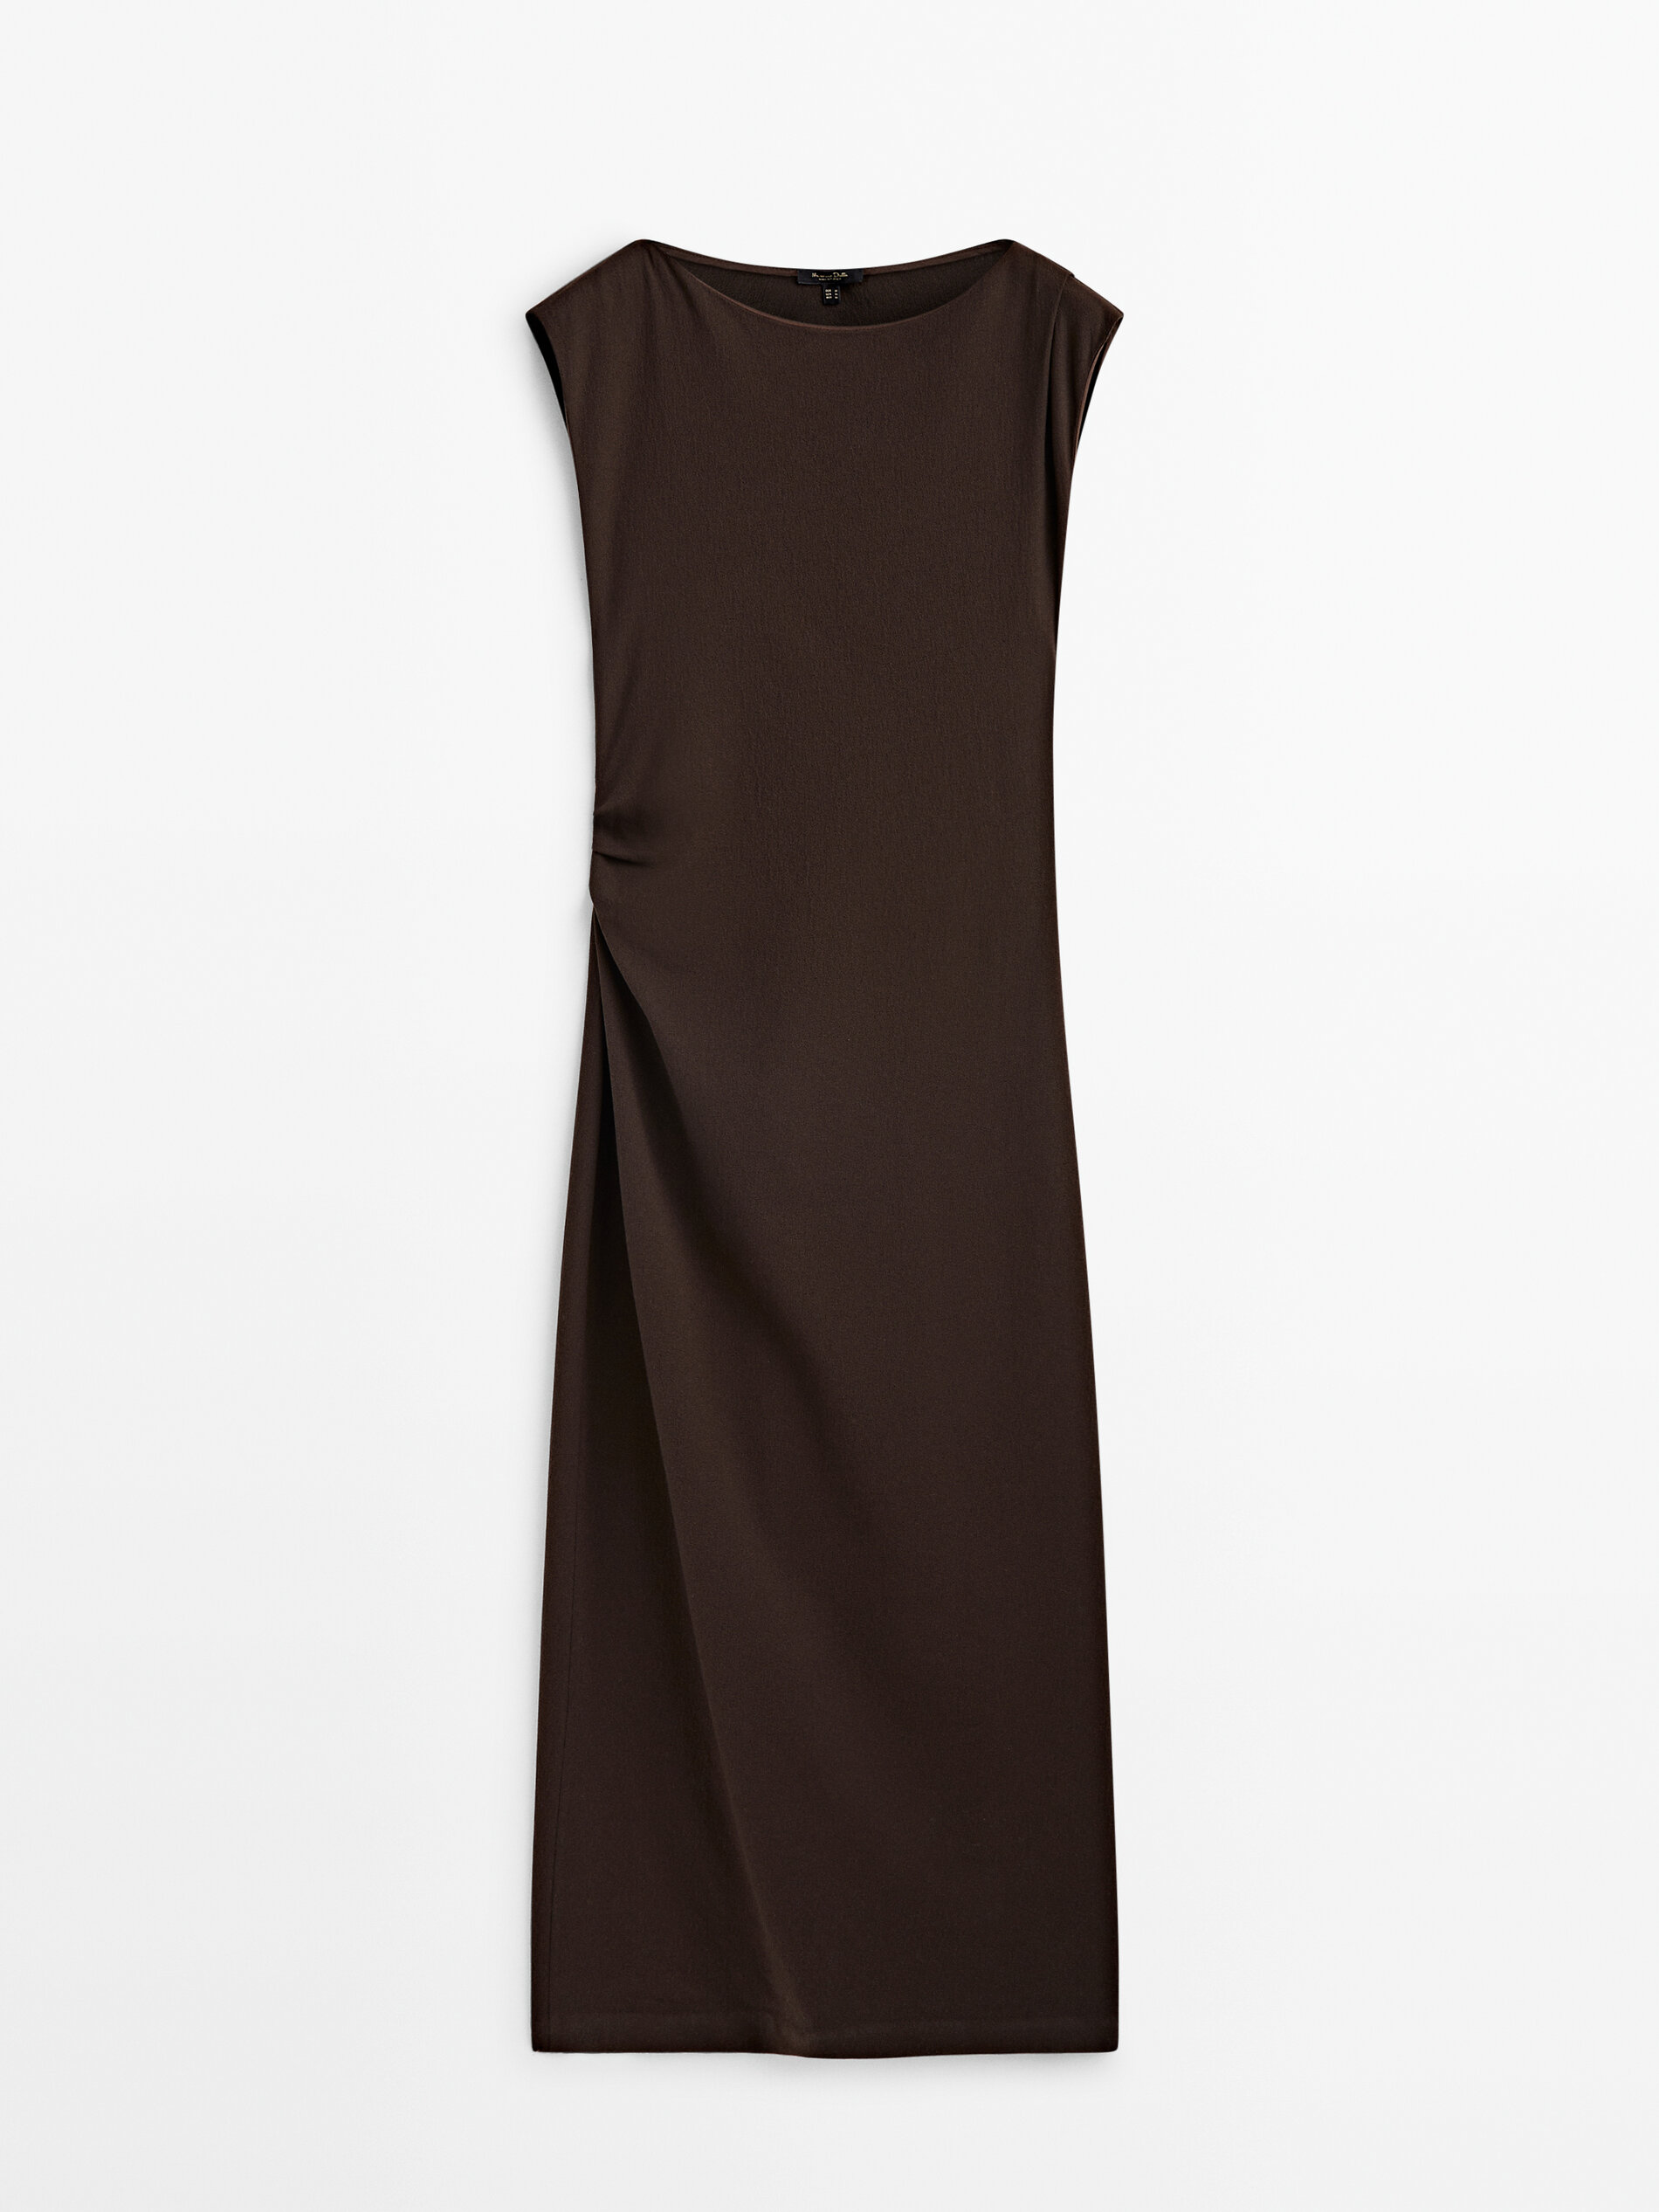 Lyocell blend dress with gathered detail on the side · Chocolate